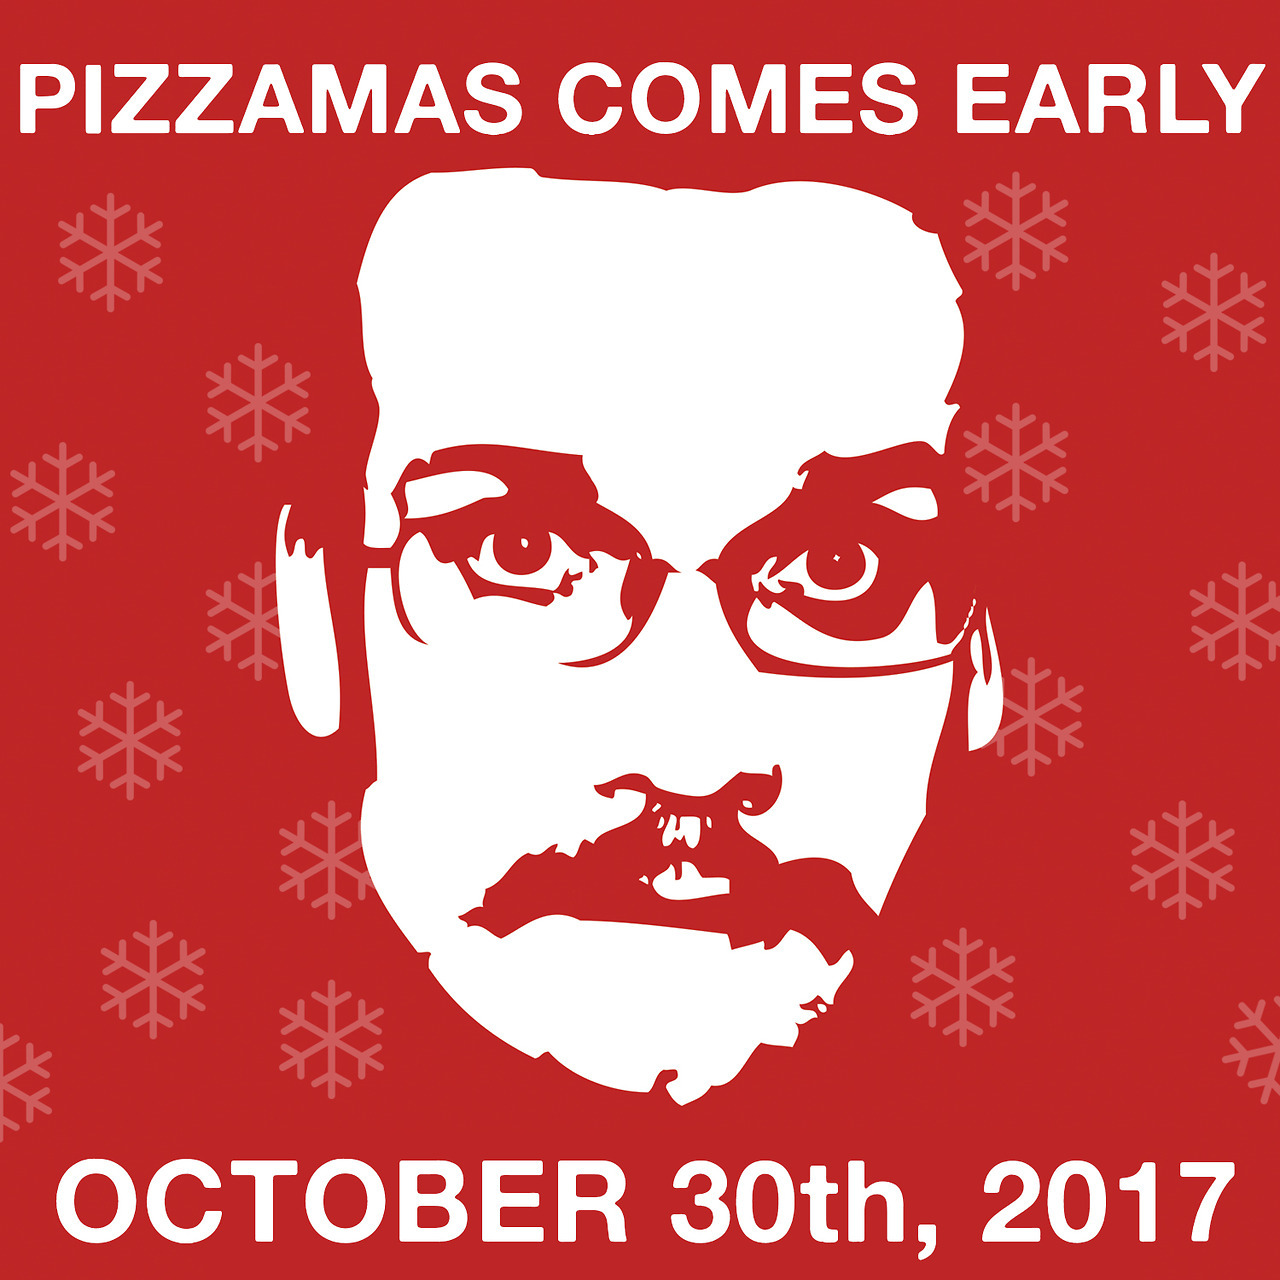 Get ready because your favorite two weeks out of the year is coming early! PIZZAMAS OCT 30th- November 10th, 2017